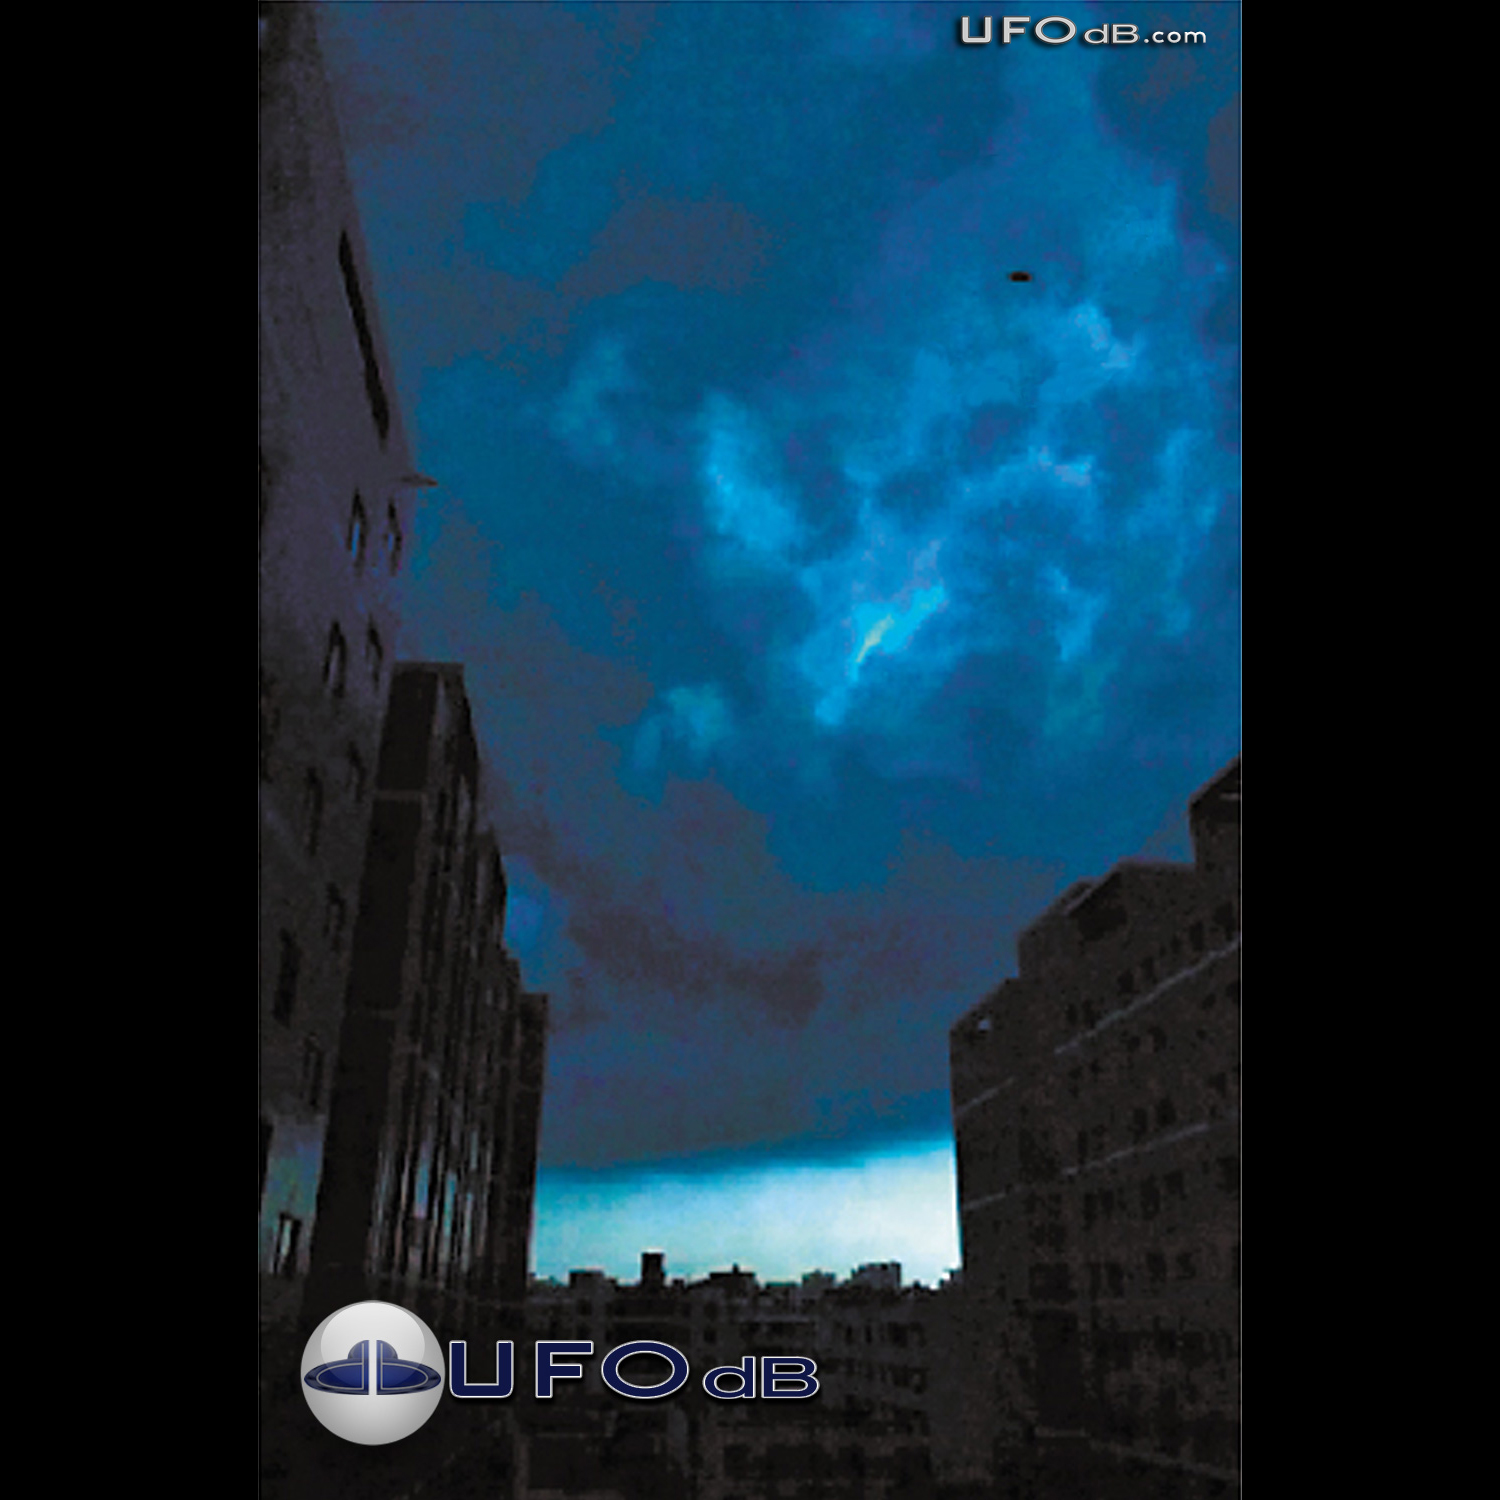 Dongguan Students get controversial UFO picture | China | May 11 2011 UFO Picture #289-1